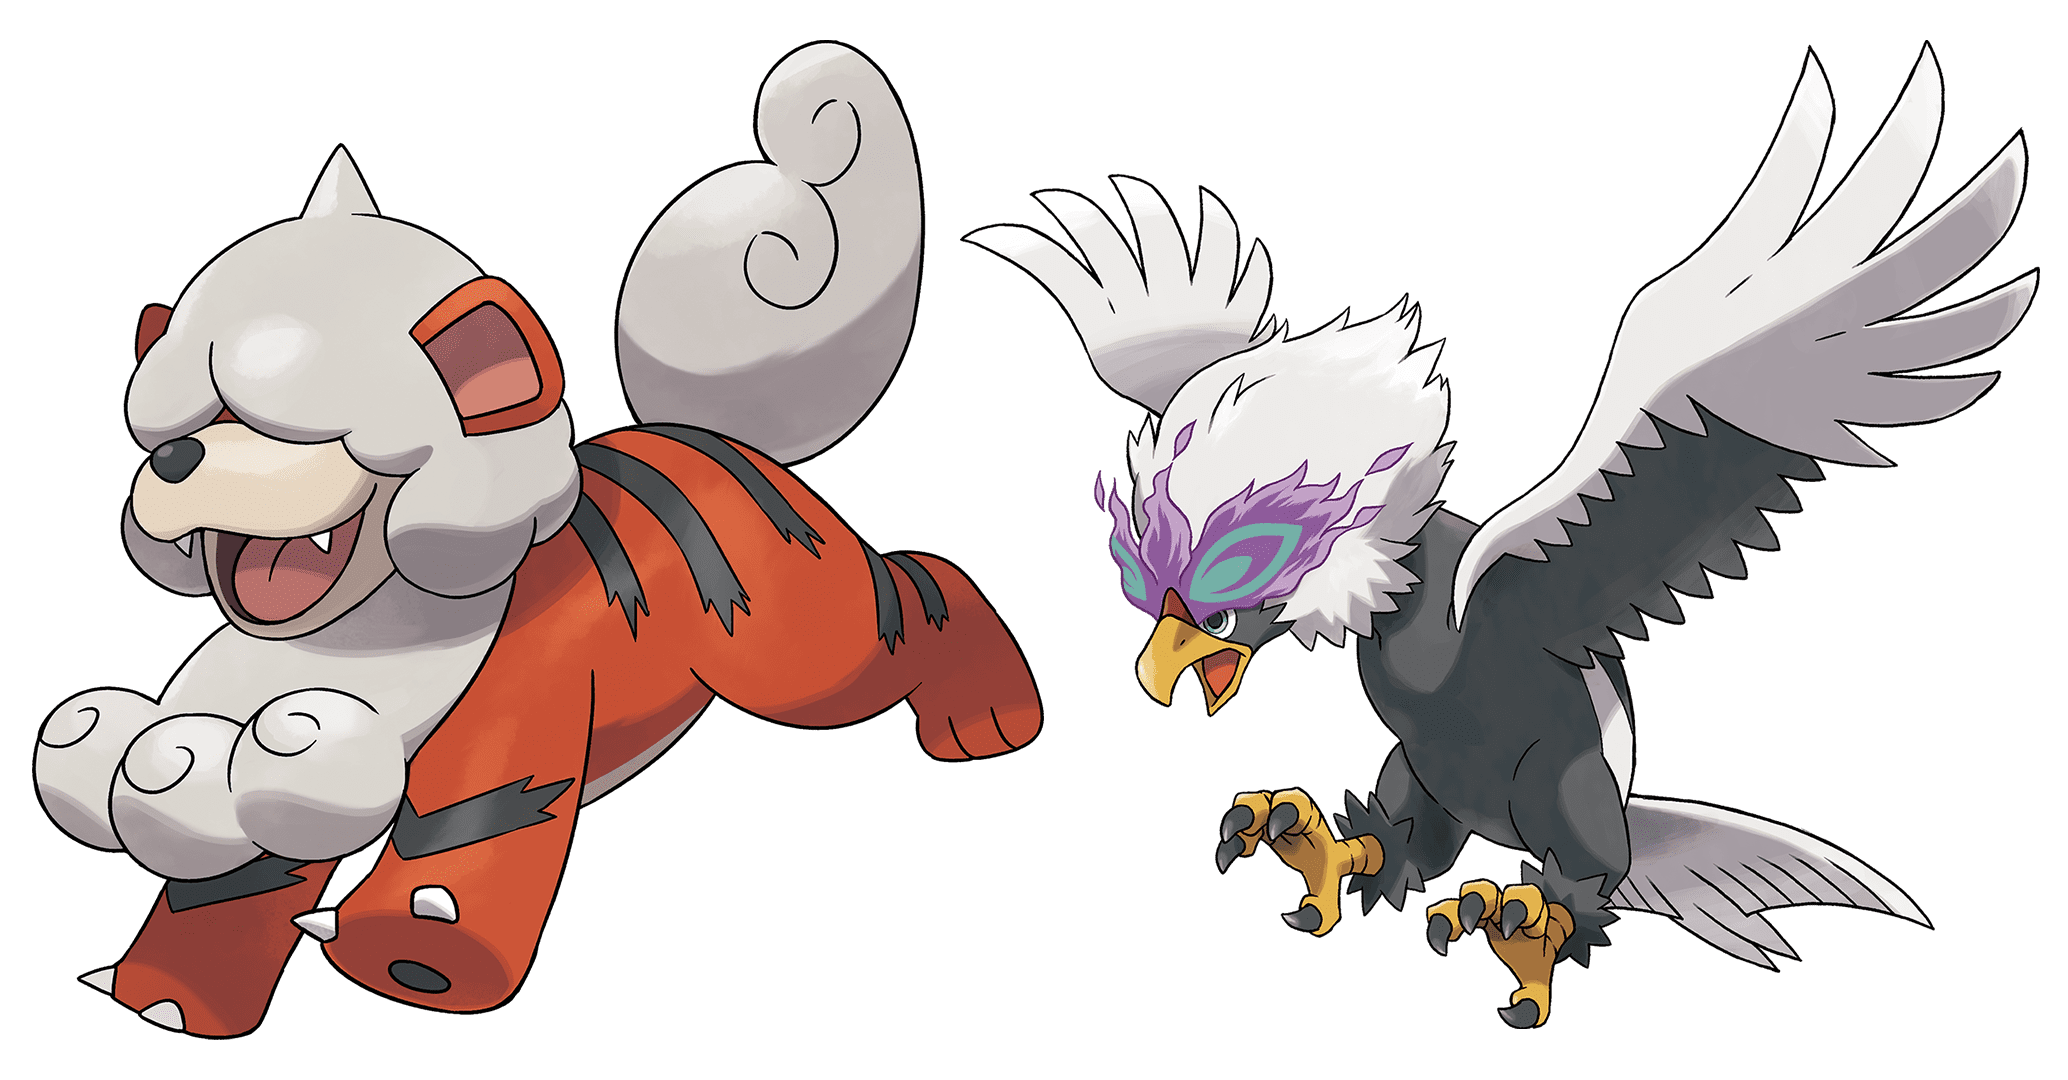 Hisuian Growlithe and Braviary in Legends: Arceus